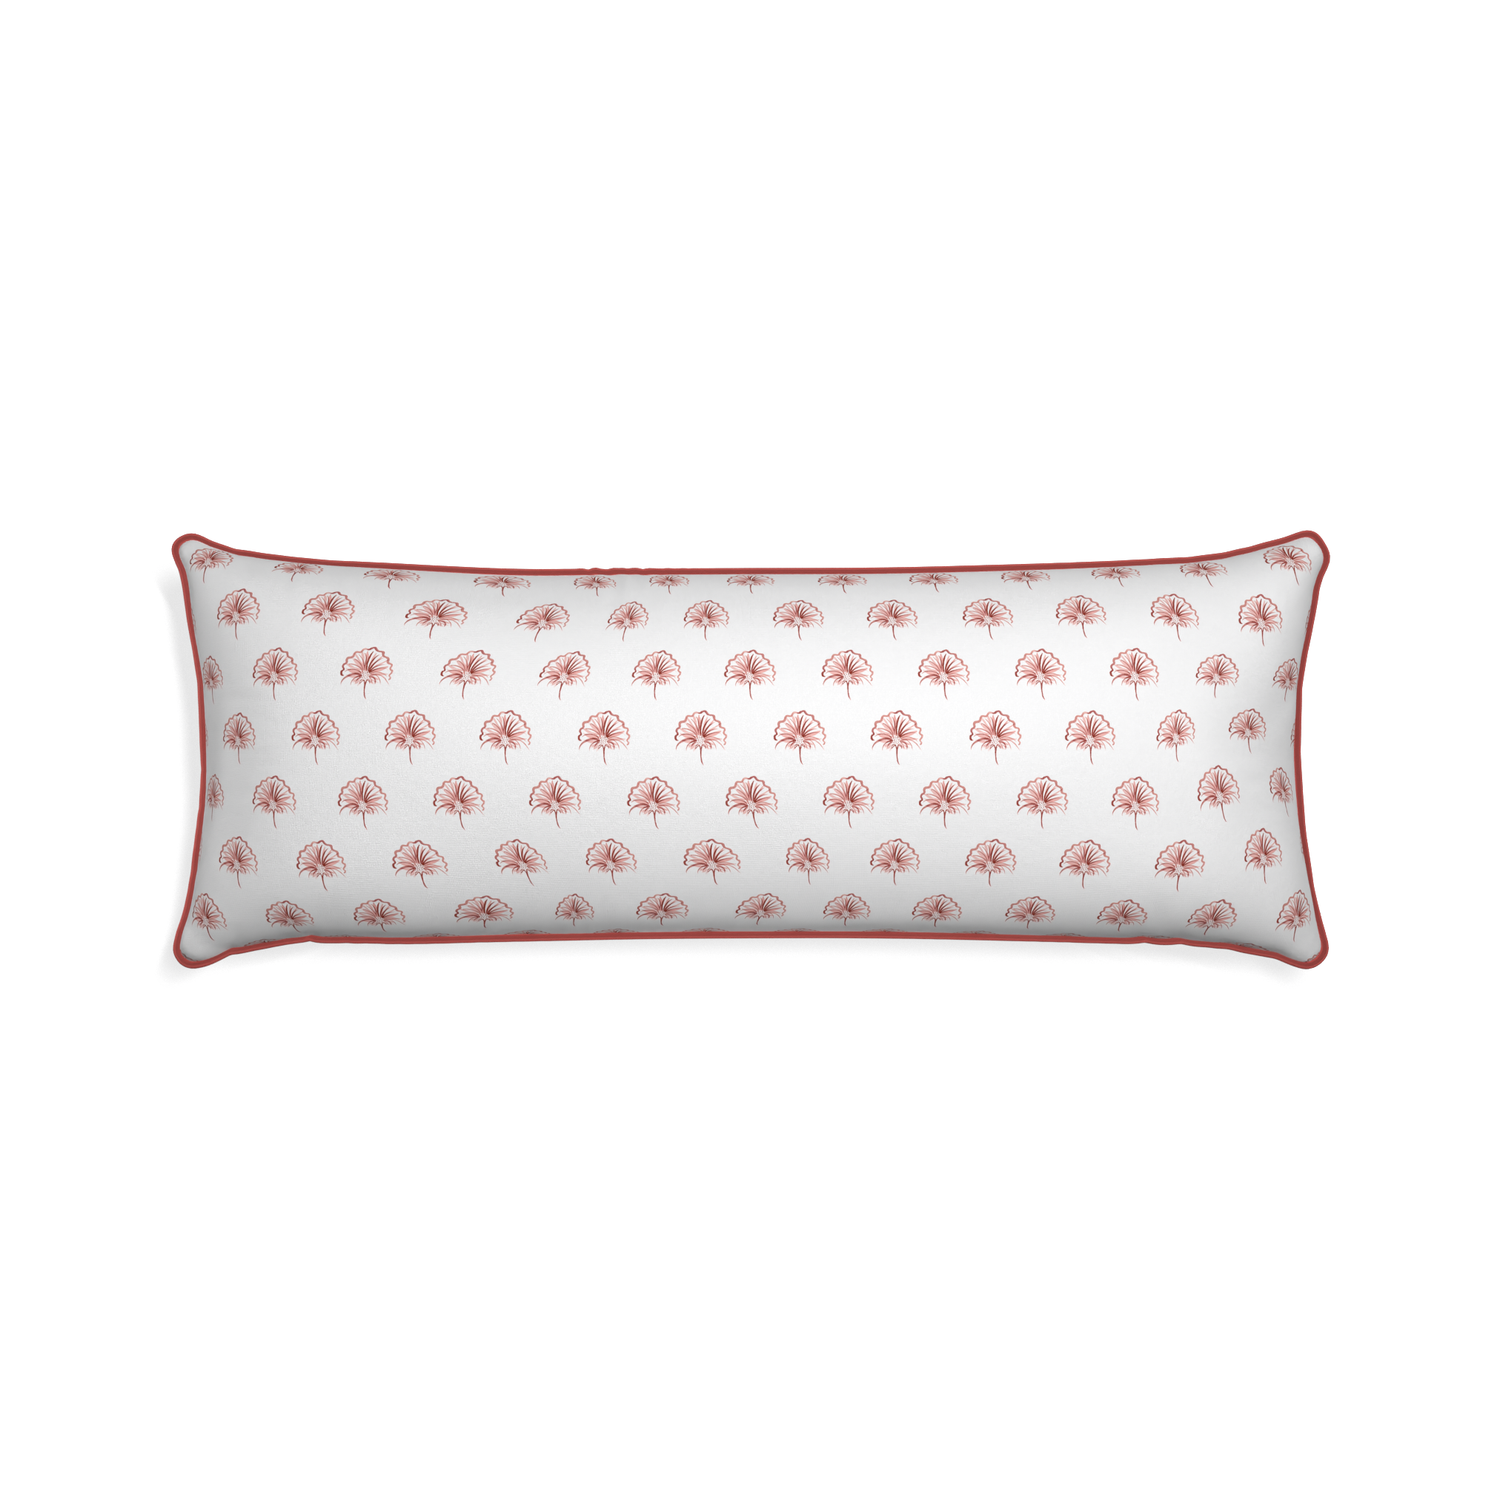 Xl-lumbar penelope rose custom pillow with c piping on white background